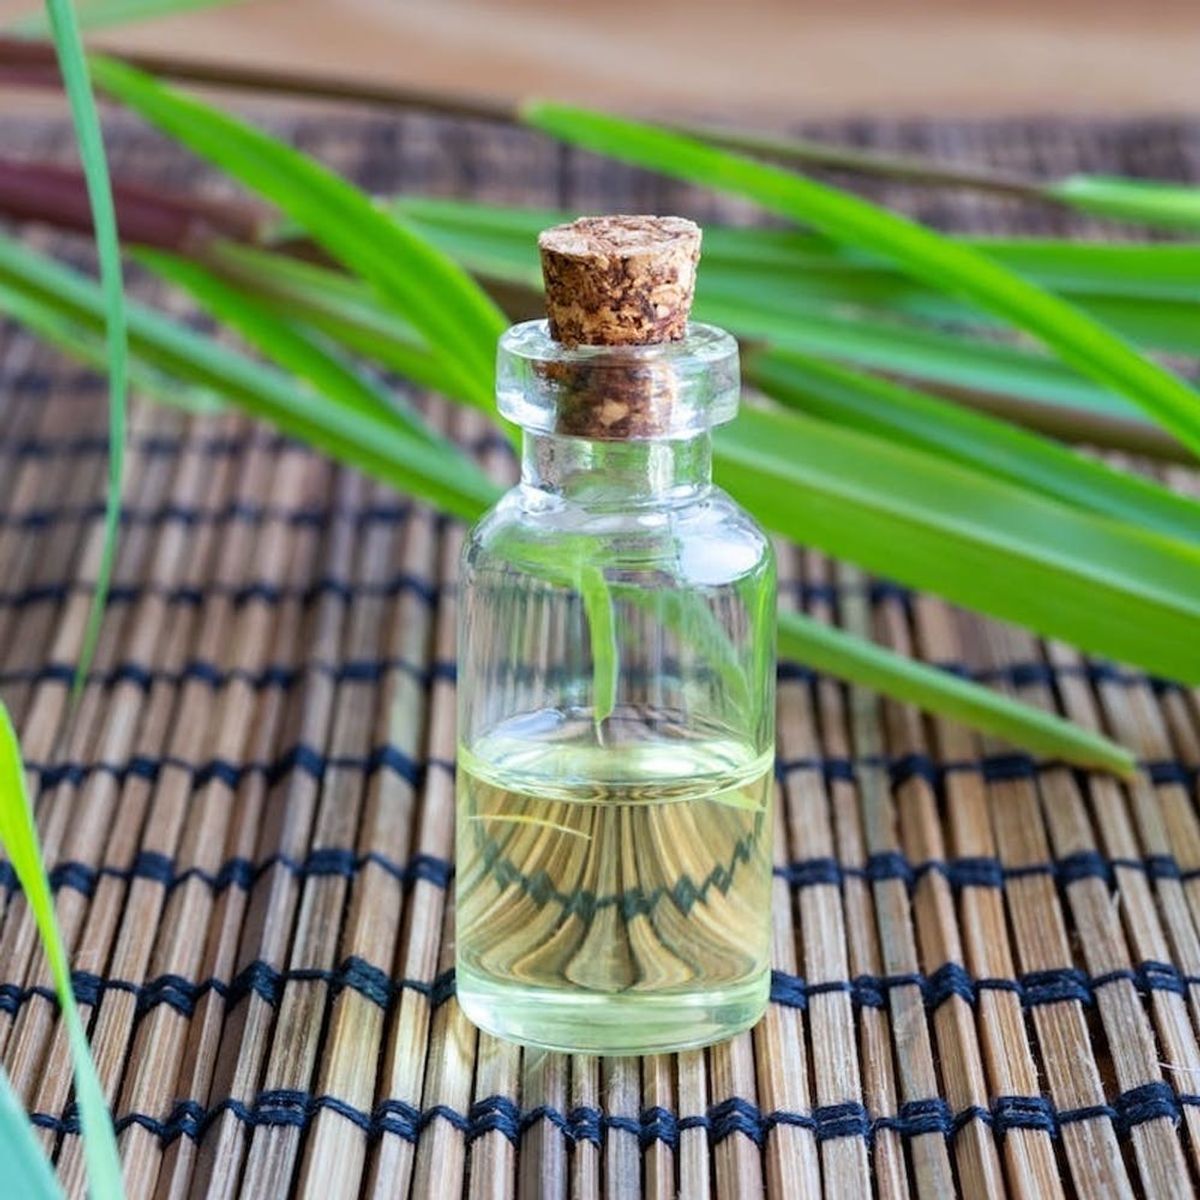 I Was an Essential Oils Skeptic Until One $5 Bottle Changed My Life